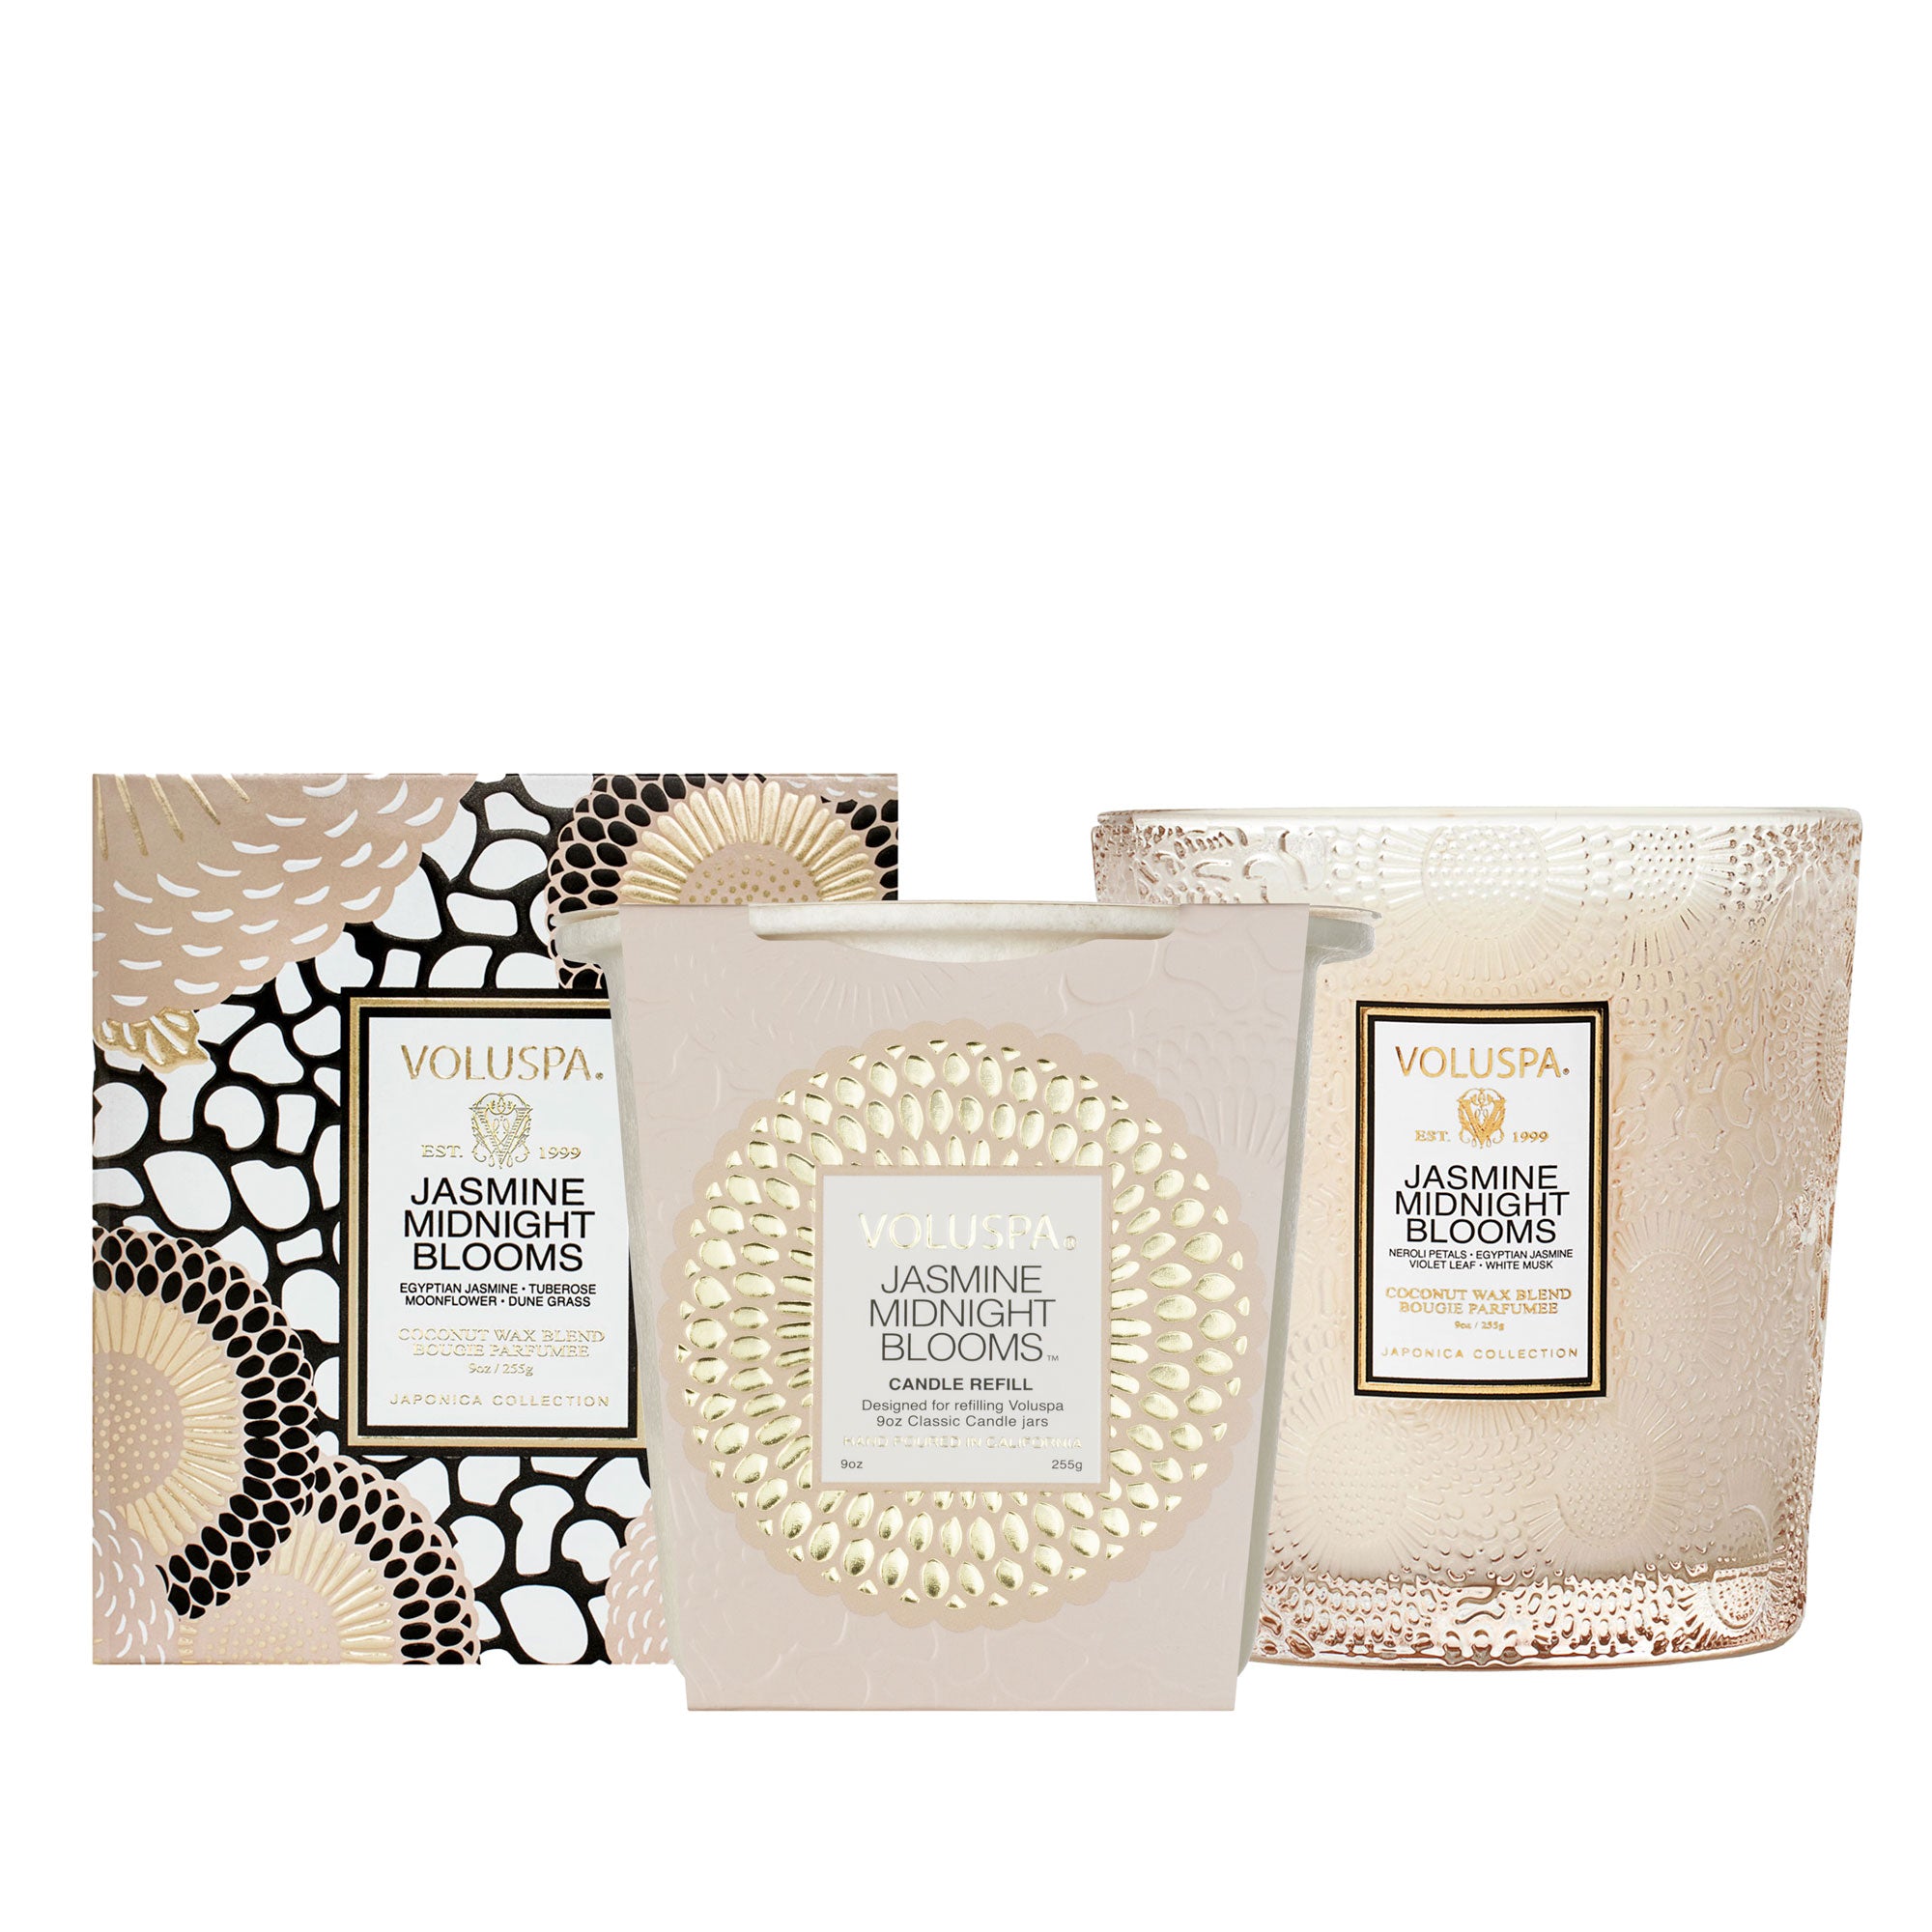 Jasmine Midnight Blooms - Classic Candle & Refill